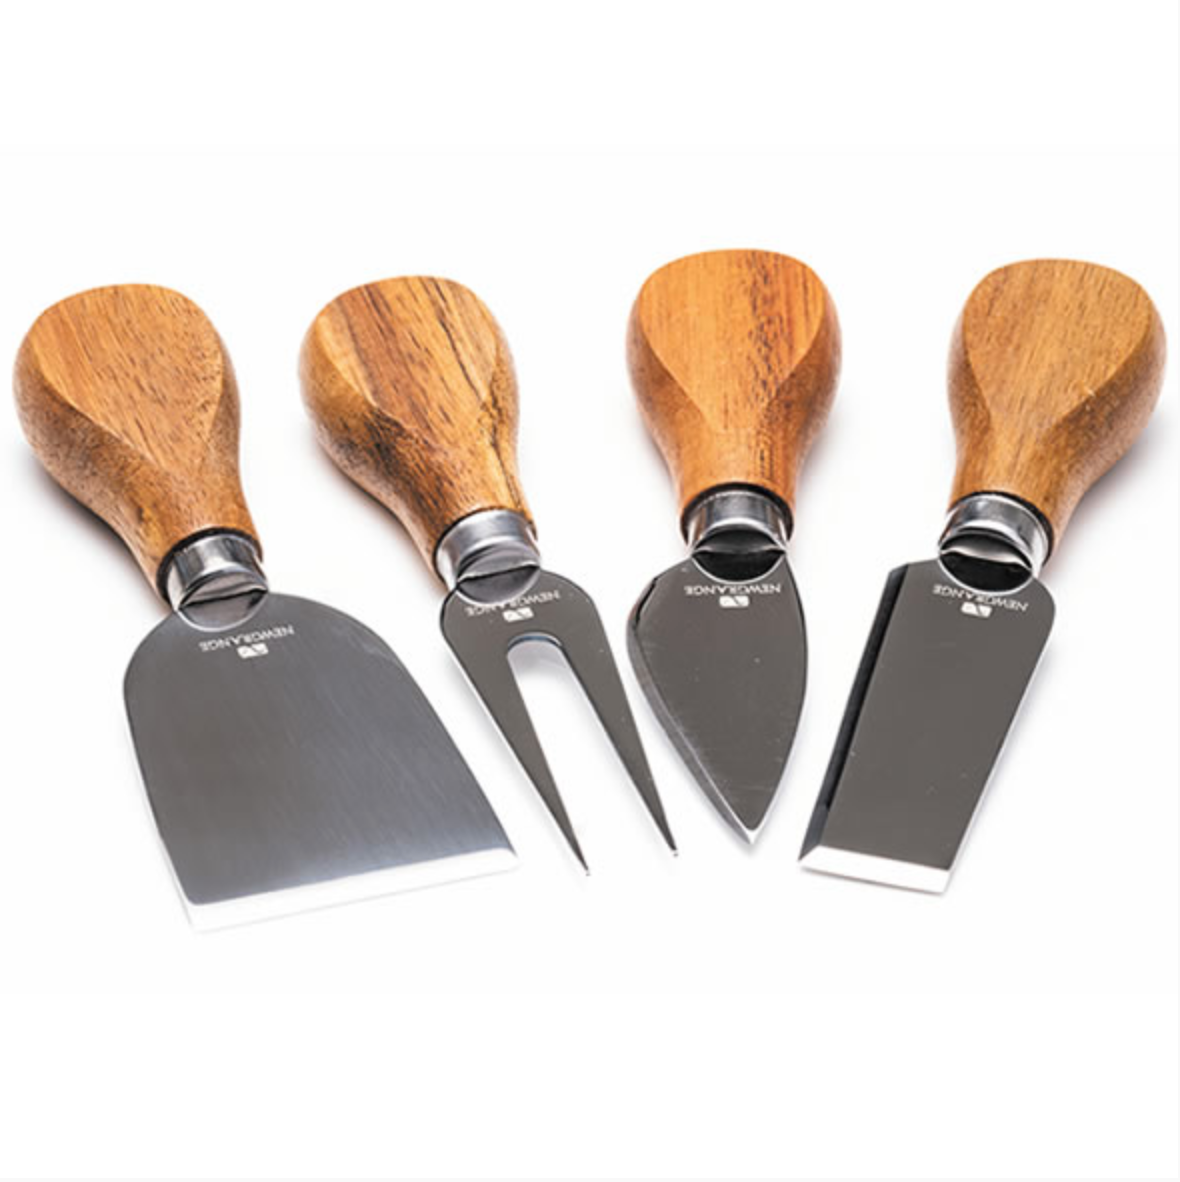 CHEESE KNIFE SET - 4 PIECE